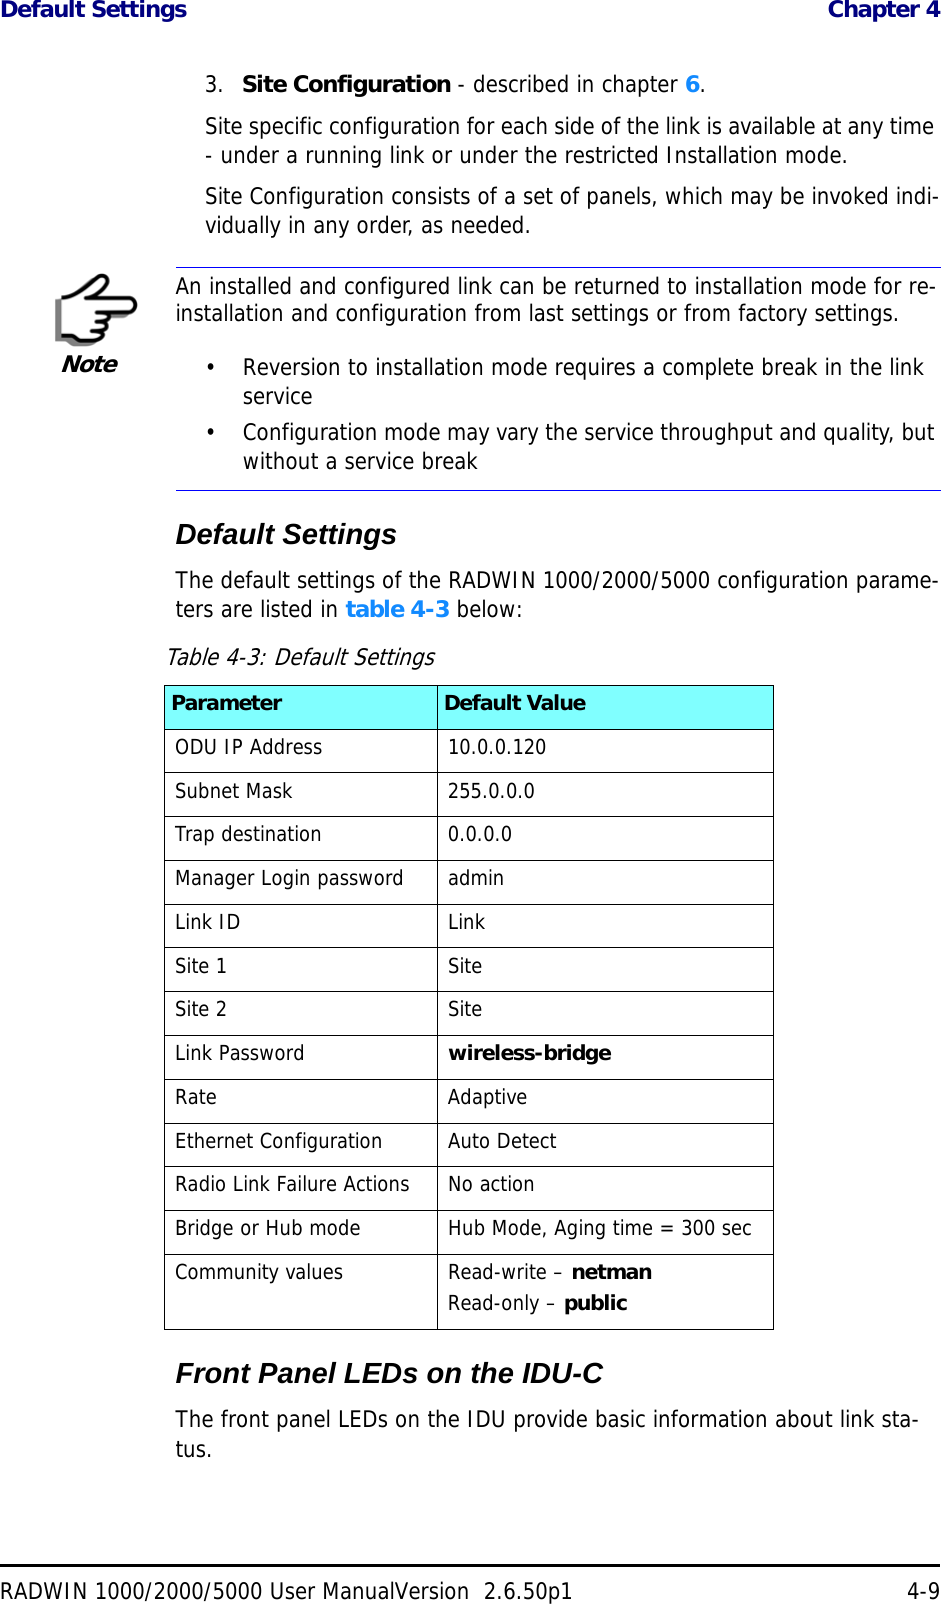 Default Settings  Chapter 4RADWIN 1000/2000/5000 User ManualVersion  2.6.50p1 4-93.  Site Configuration - described in chapter 6.Site specific configuration for each side of the link is available at any time - under a running link or under the restricted Installation mode.Site Configuration consists of a set of panels, which may be invoked indi-vidually in any order, as needed.Default SettingsThe default settings of the RADWIN 1000/2000/5000 configuration parame-ters are listed in table 4-3 below:Front Panel LEDs on the IDU-CThe front panel LEDs on the IDU provide basic information about link sta-tus. NoteAn installed and configured link can be returned to installation mode for re-installation and configuration from last settings or from factory settings.• Reversion to installation mode requires a complete break in the link service• Configuration mode may vary the service throughput and quality, but without a service breakTable 4-3: Default SettingsParameter Default ValueODU IP Address 10.0.0.120Subnet Mask 255.0.0.0Trap destination 0.0.0.0Manager Login password adminLink ID Link Site 1 SiteSite 2 SiteLink Password wireless-bridgeRate AdaptiveEthernet Configuration Auto DetectRadio Link Failure Actions No actionBridge or Hub mode Hub Mode, Aging time = 300 secCommunity values Read-write – netmanRead-only – public